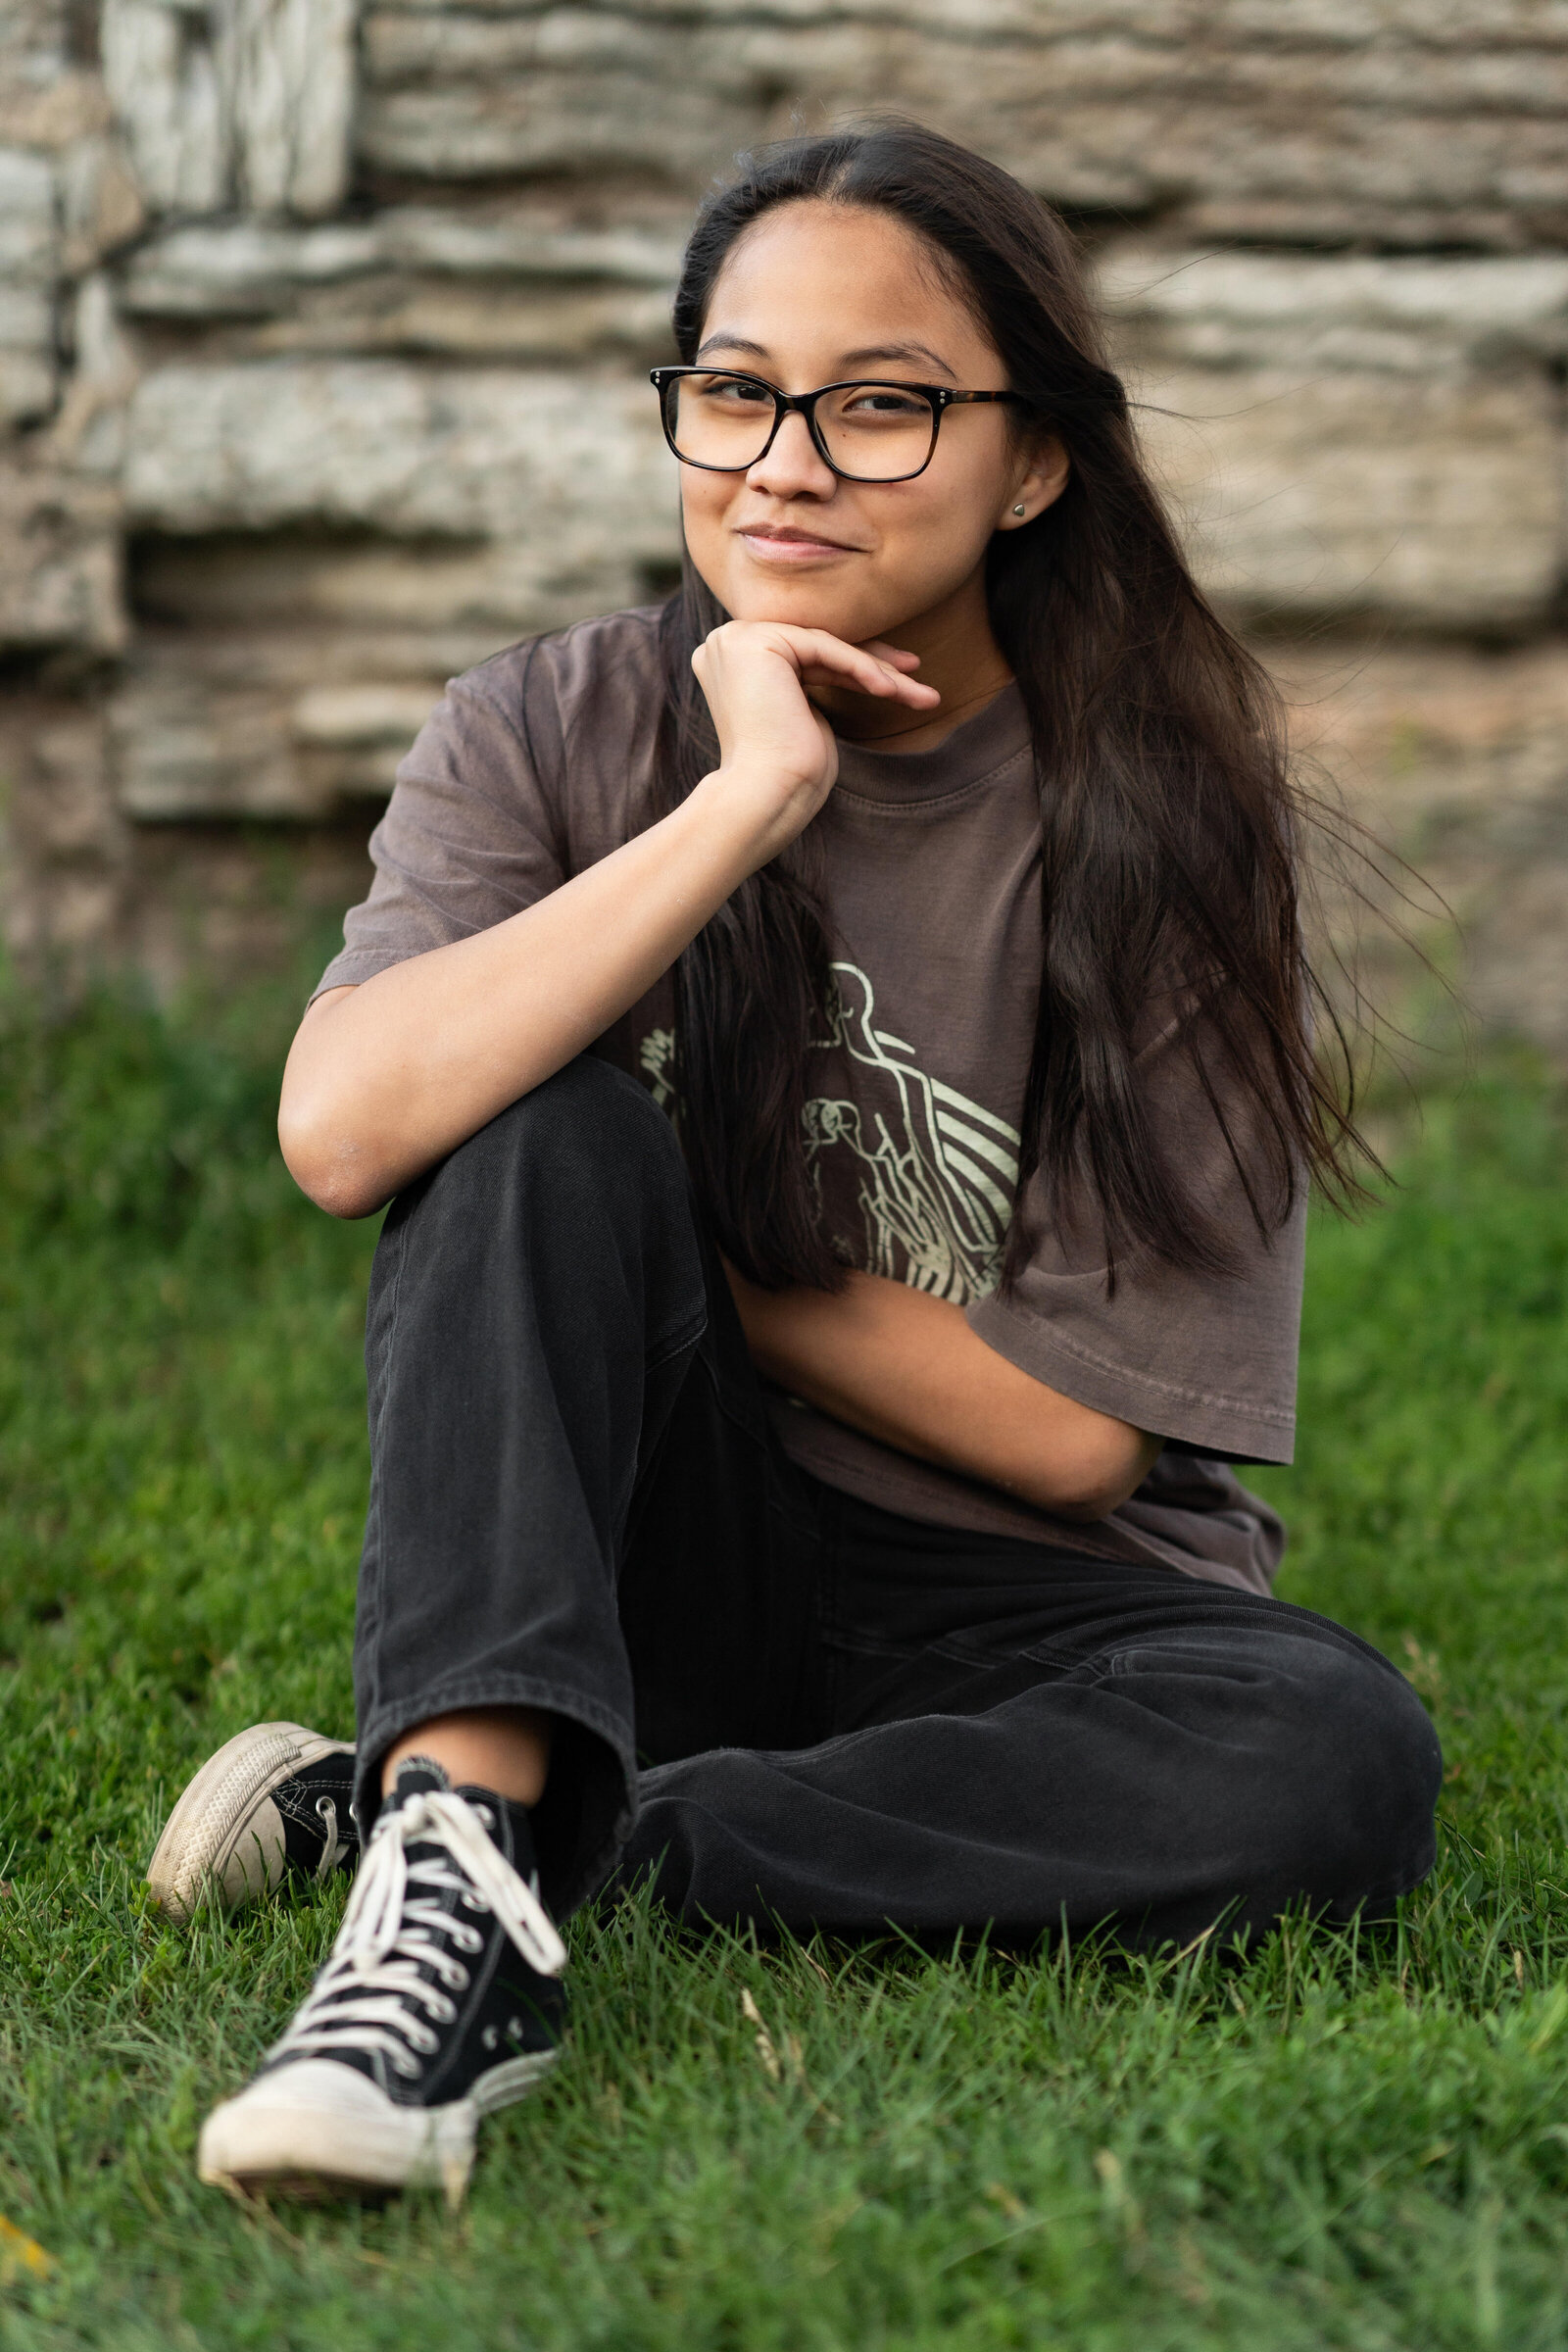 Senior girl smiles while sitting in the grass wearing a t-shirt and jeans.